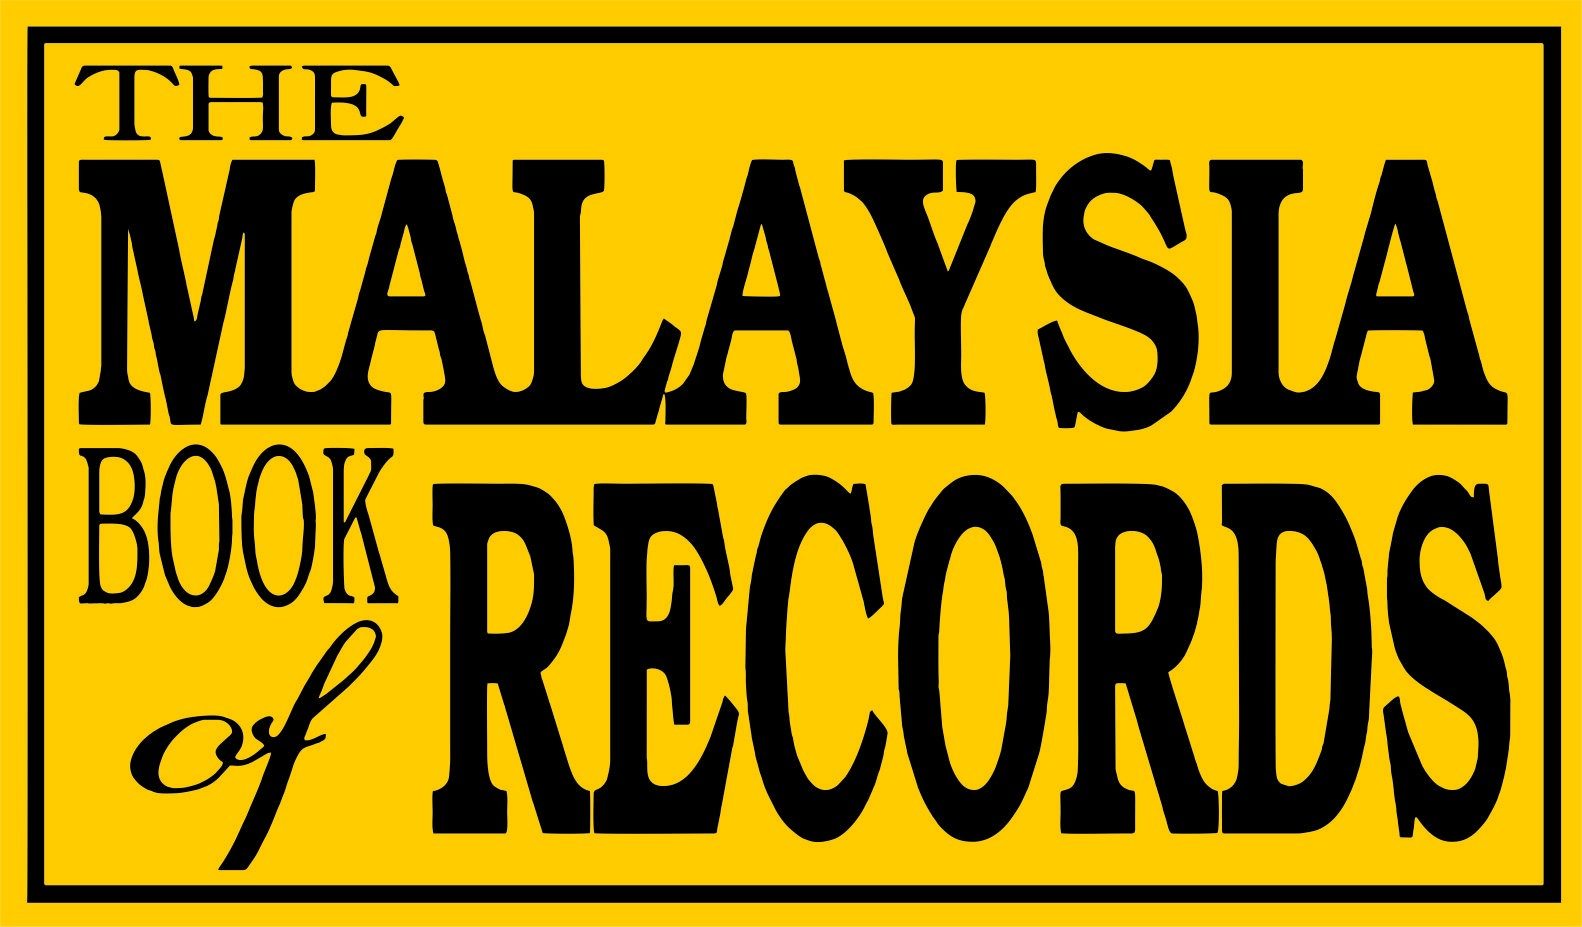 mbor malaysia book of records